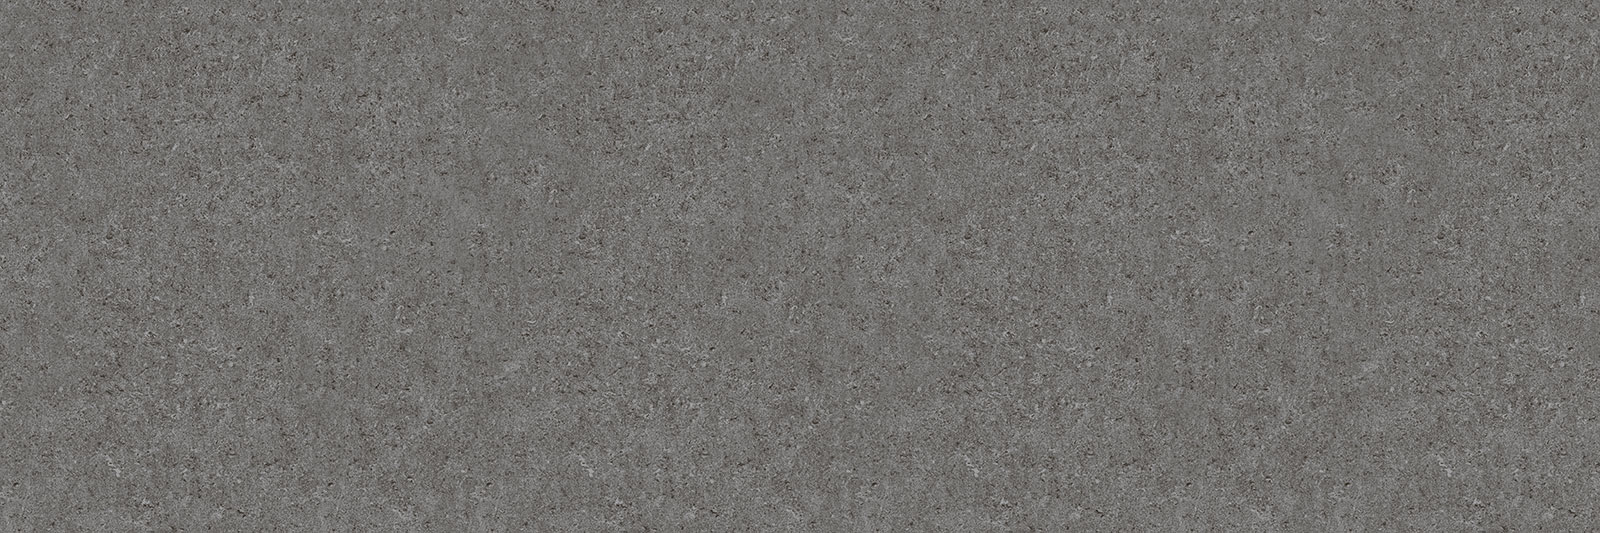 Speckled Stone Grey